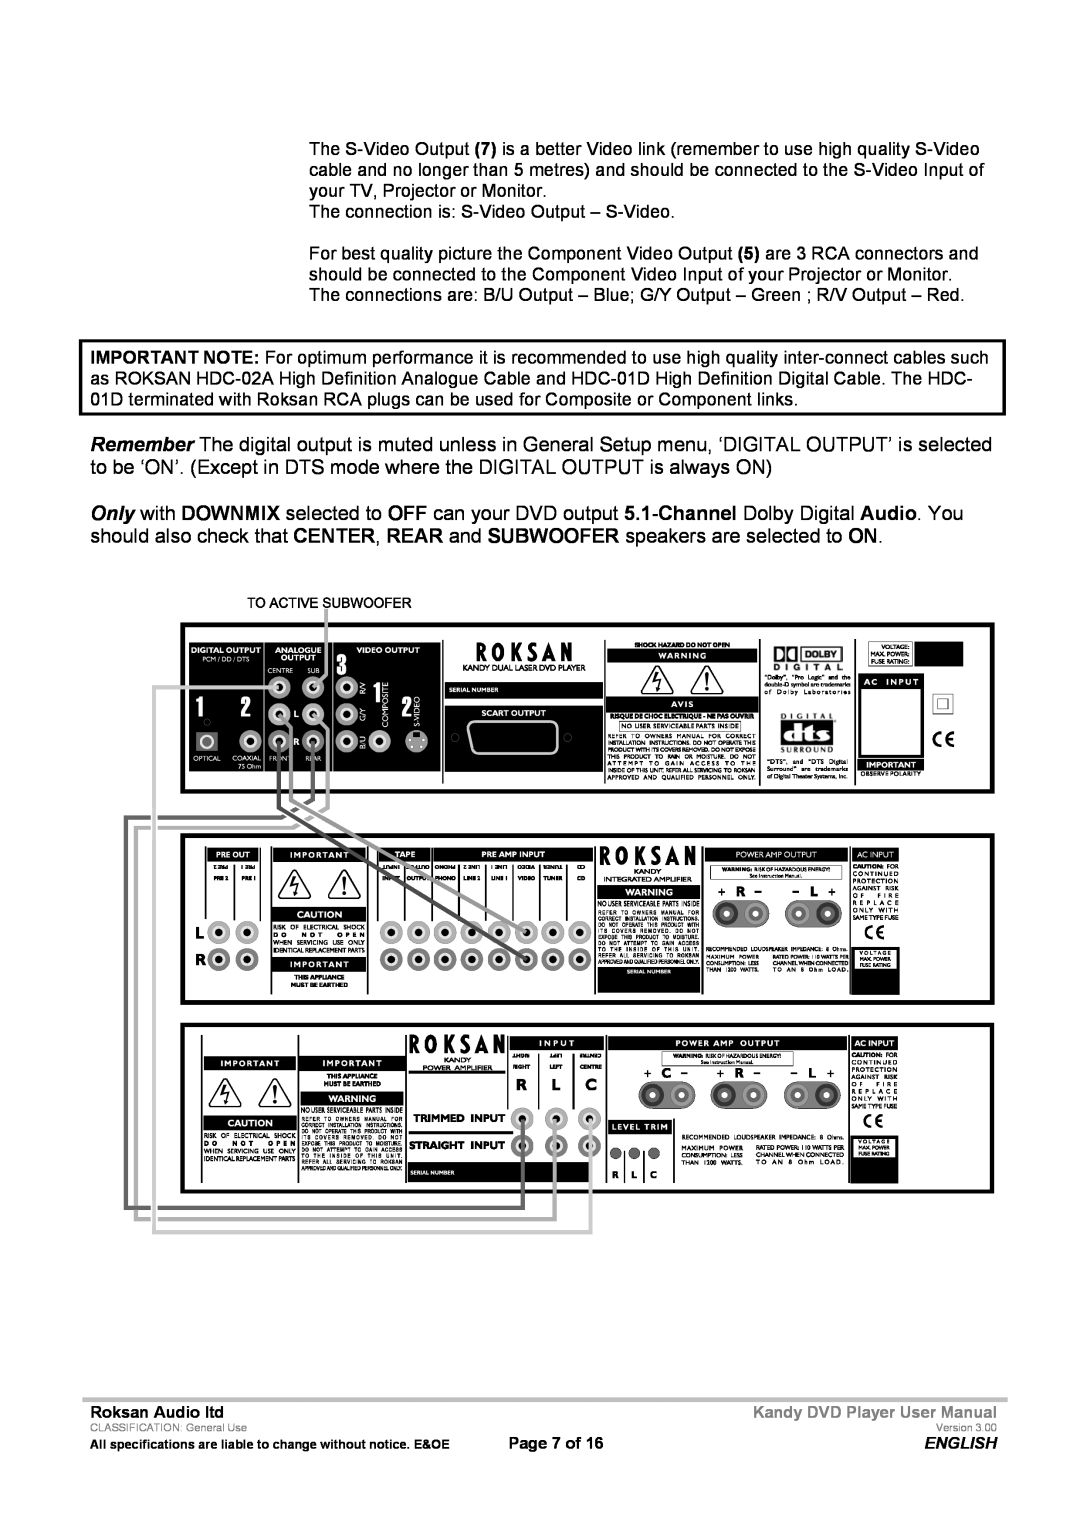 Roksan Audio MkIII user manual The connection is S-VideoOutput - S-Video 